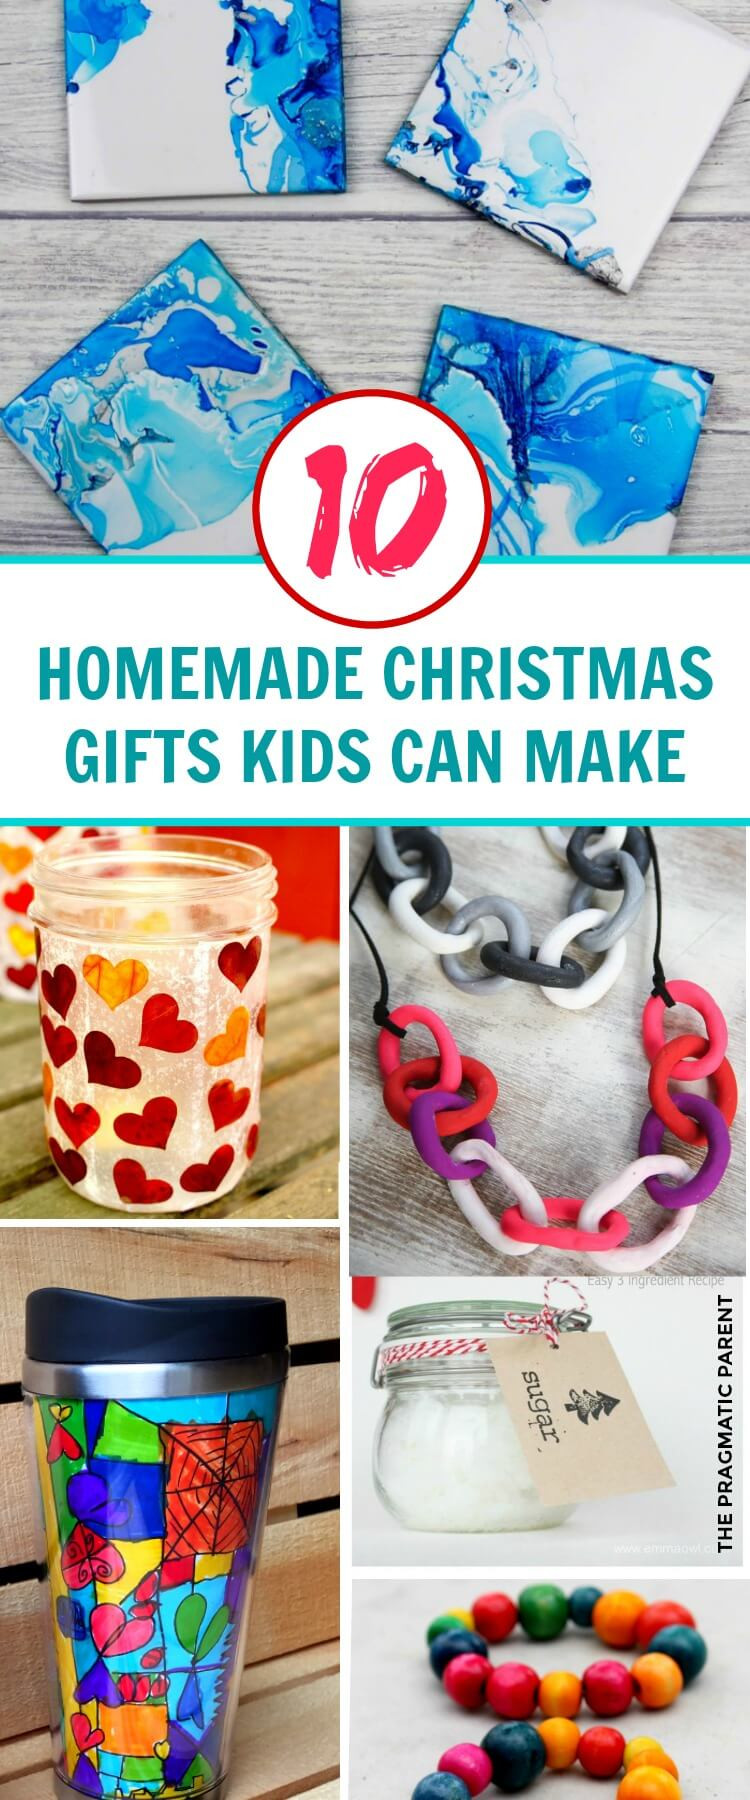 Homemade Gifts From Toddlers
 10 Beautiful Homemade Christmas Gifts Kids Can Make This 2020